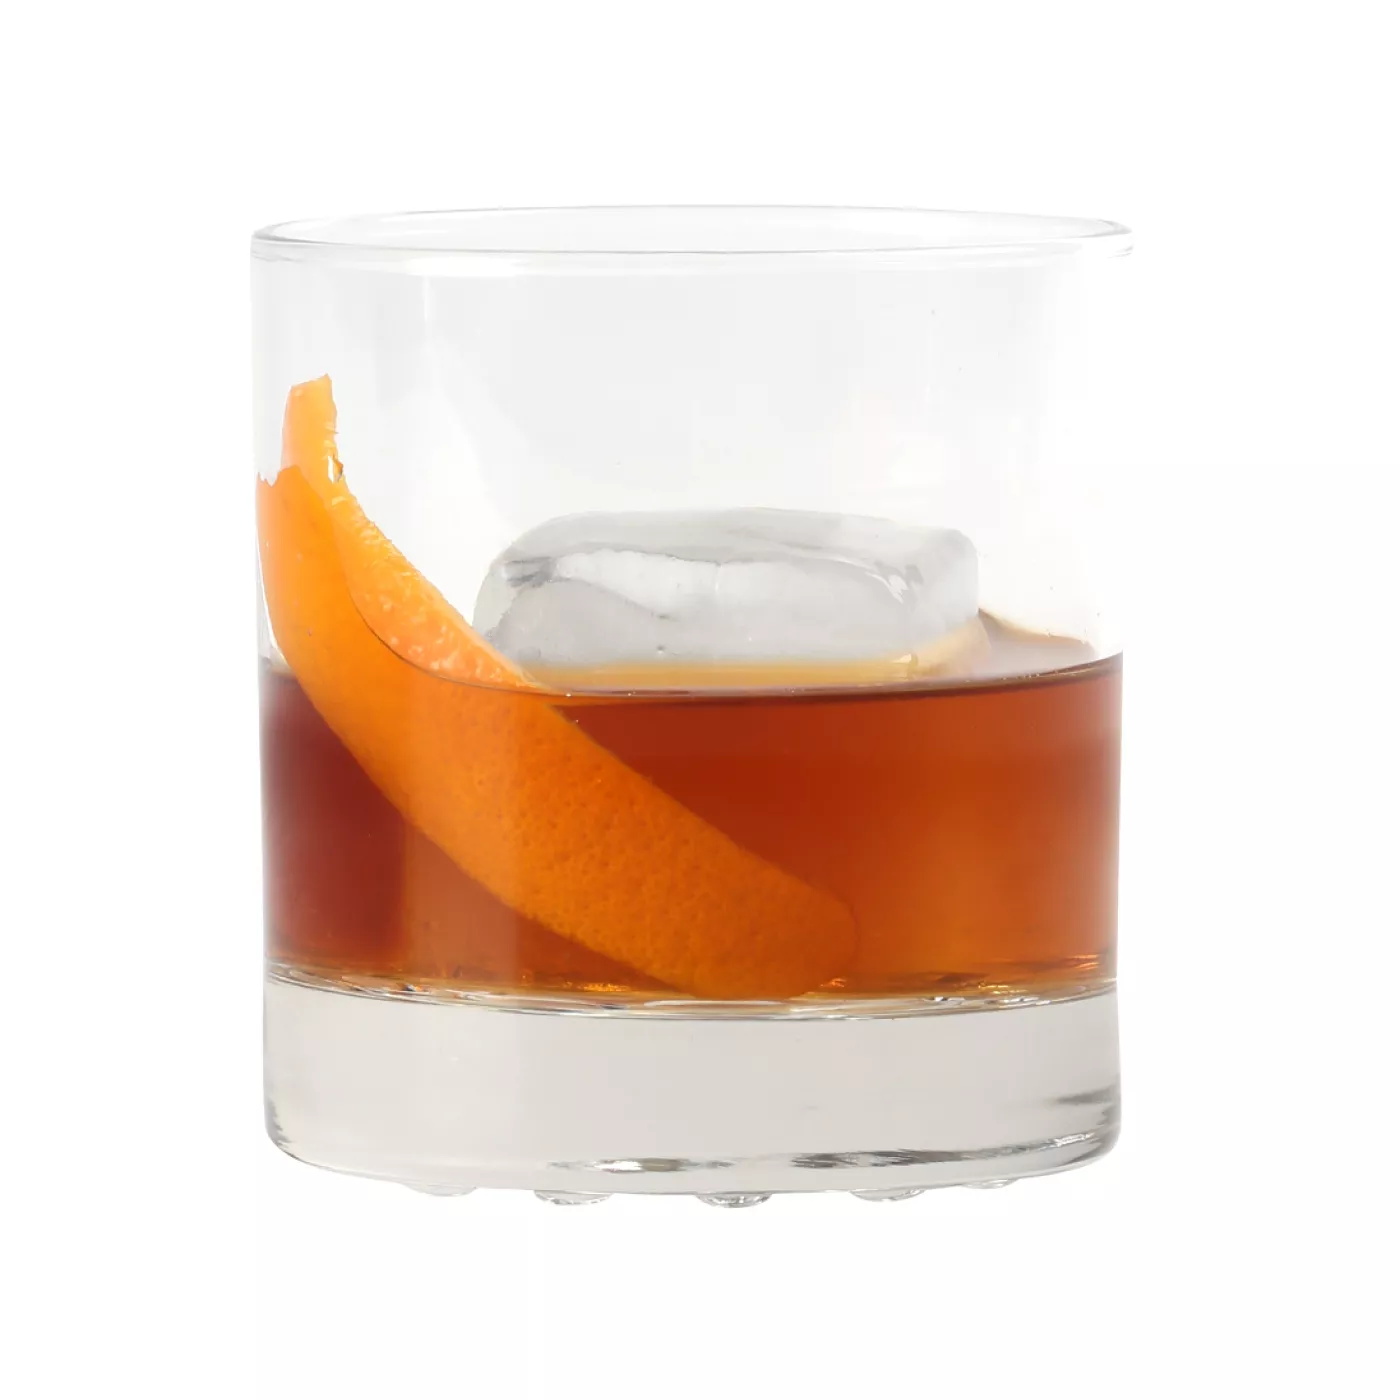 Image of a glass half filled with Old Fashioned Cocktail with garnishing of Orange peel